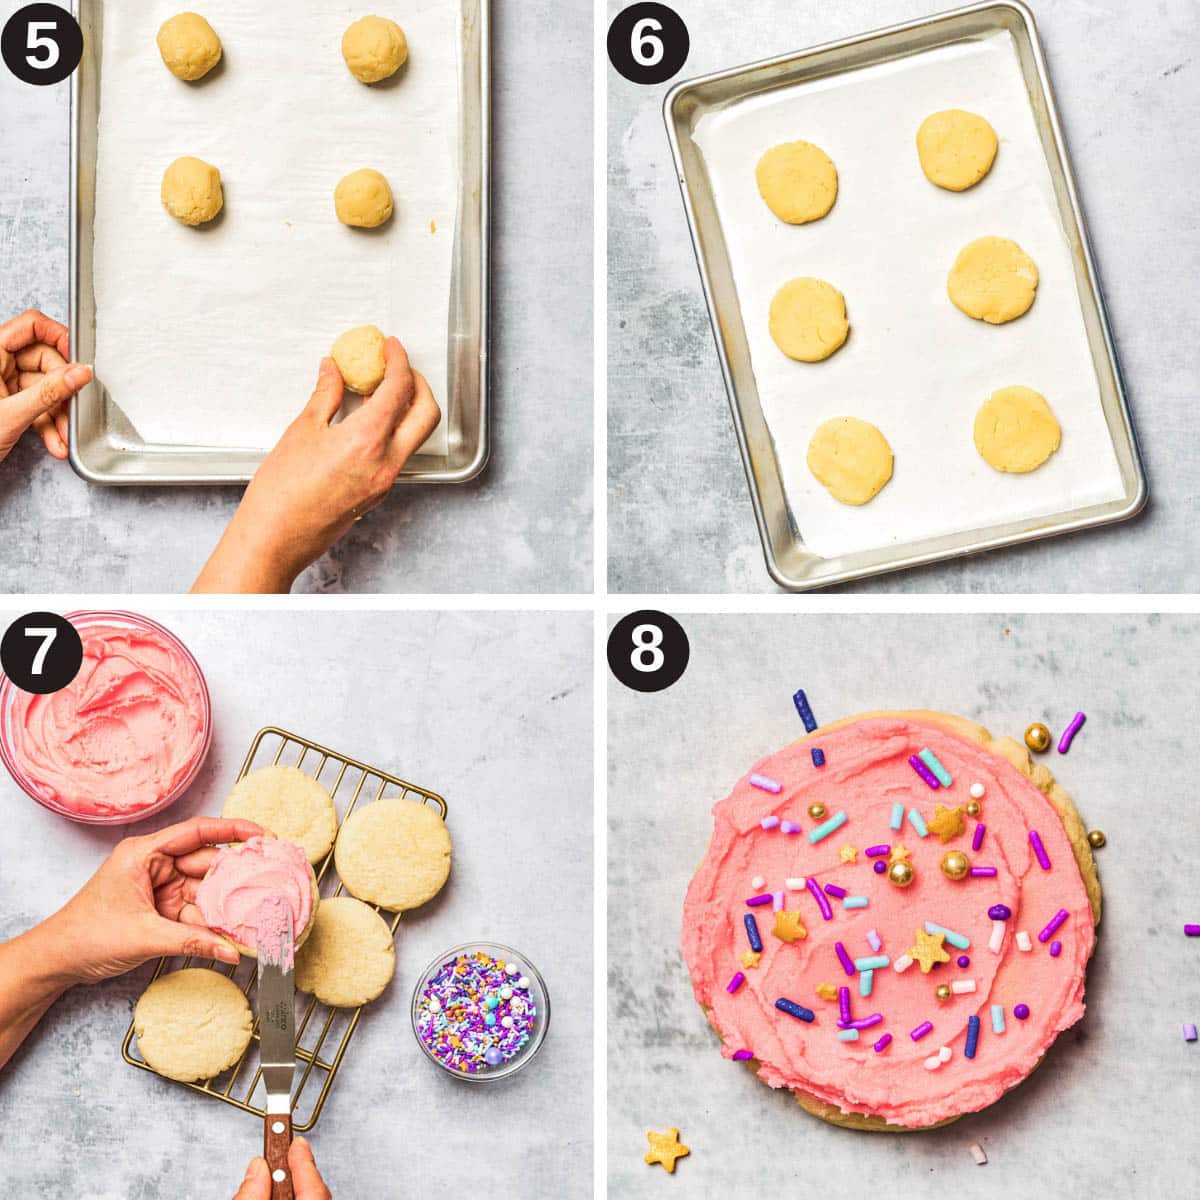 Cookies steps 5 to 8, before and after baking and frosted.